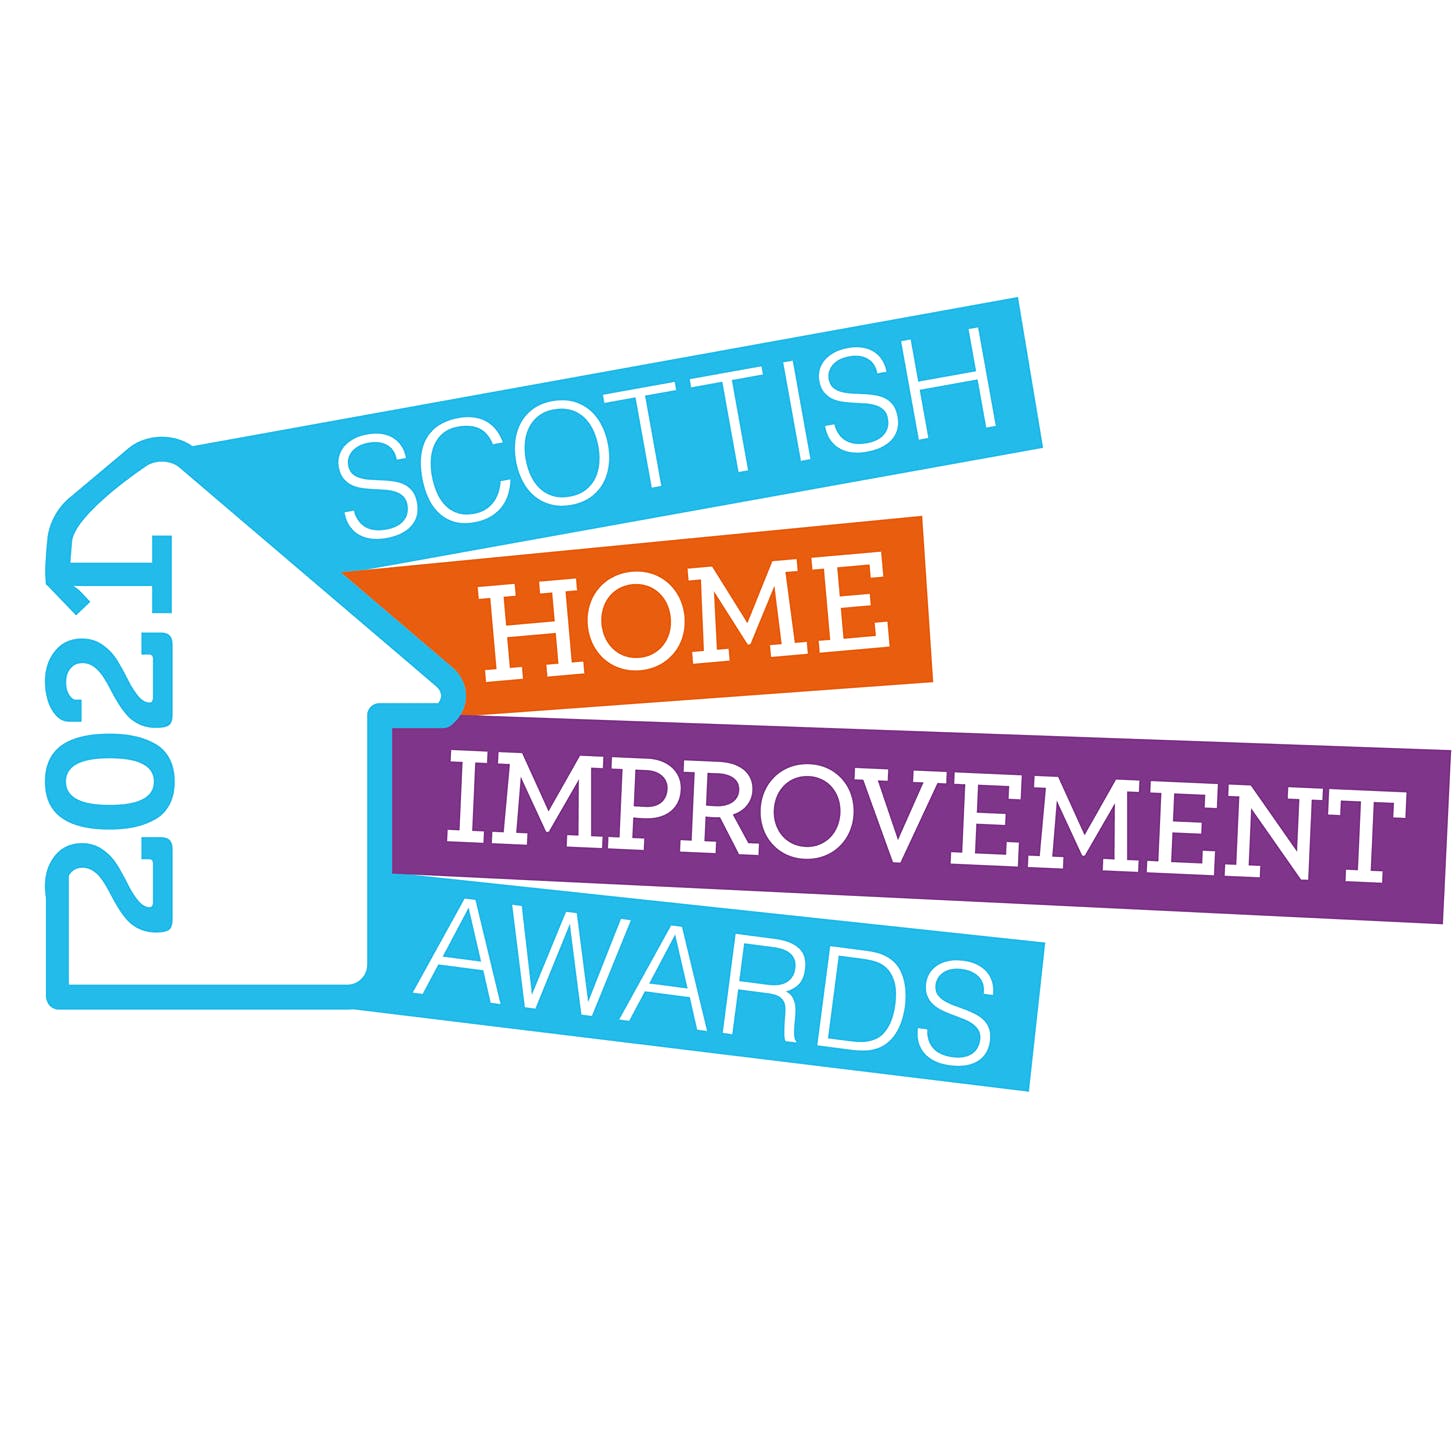 We are finalists - Scottish Home Improvement Awards 2021